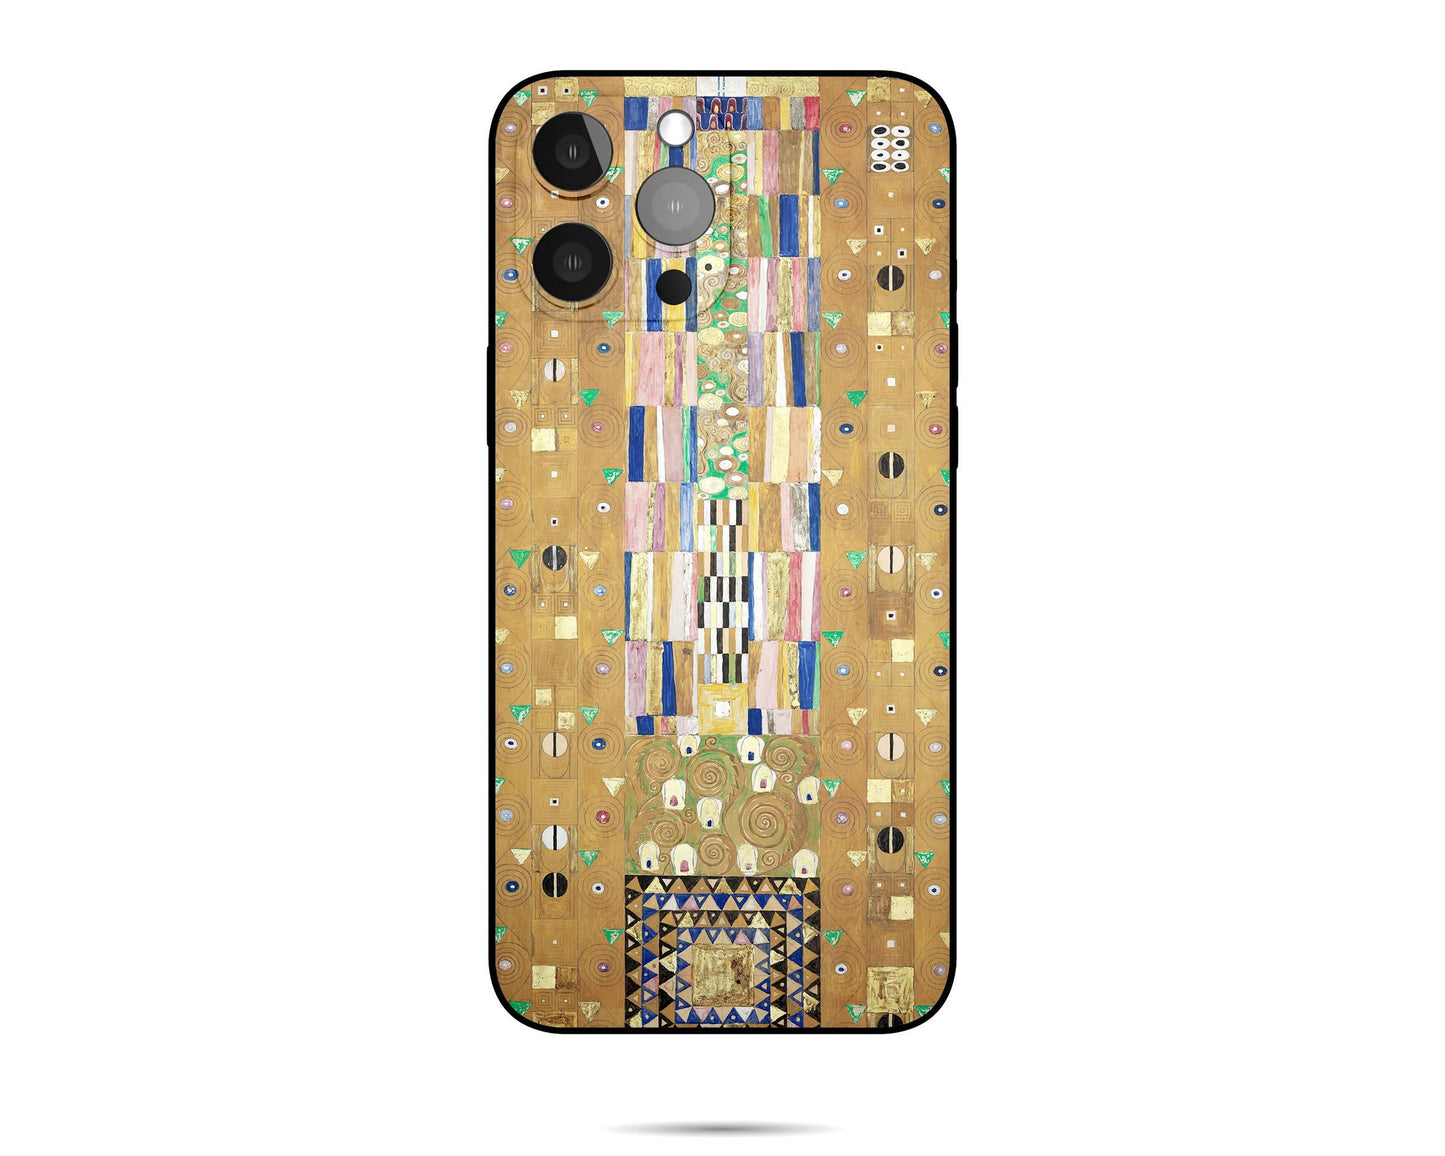 Iphone Case Of Gustav Klimt Abstract Painting Knight Iphone Cover, Iphone 12 Mini Case, Iphone Xs Max Case, Birthday Gift, Iphone Case Matte